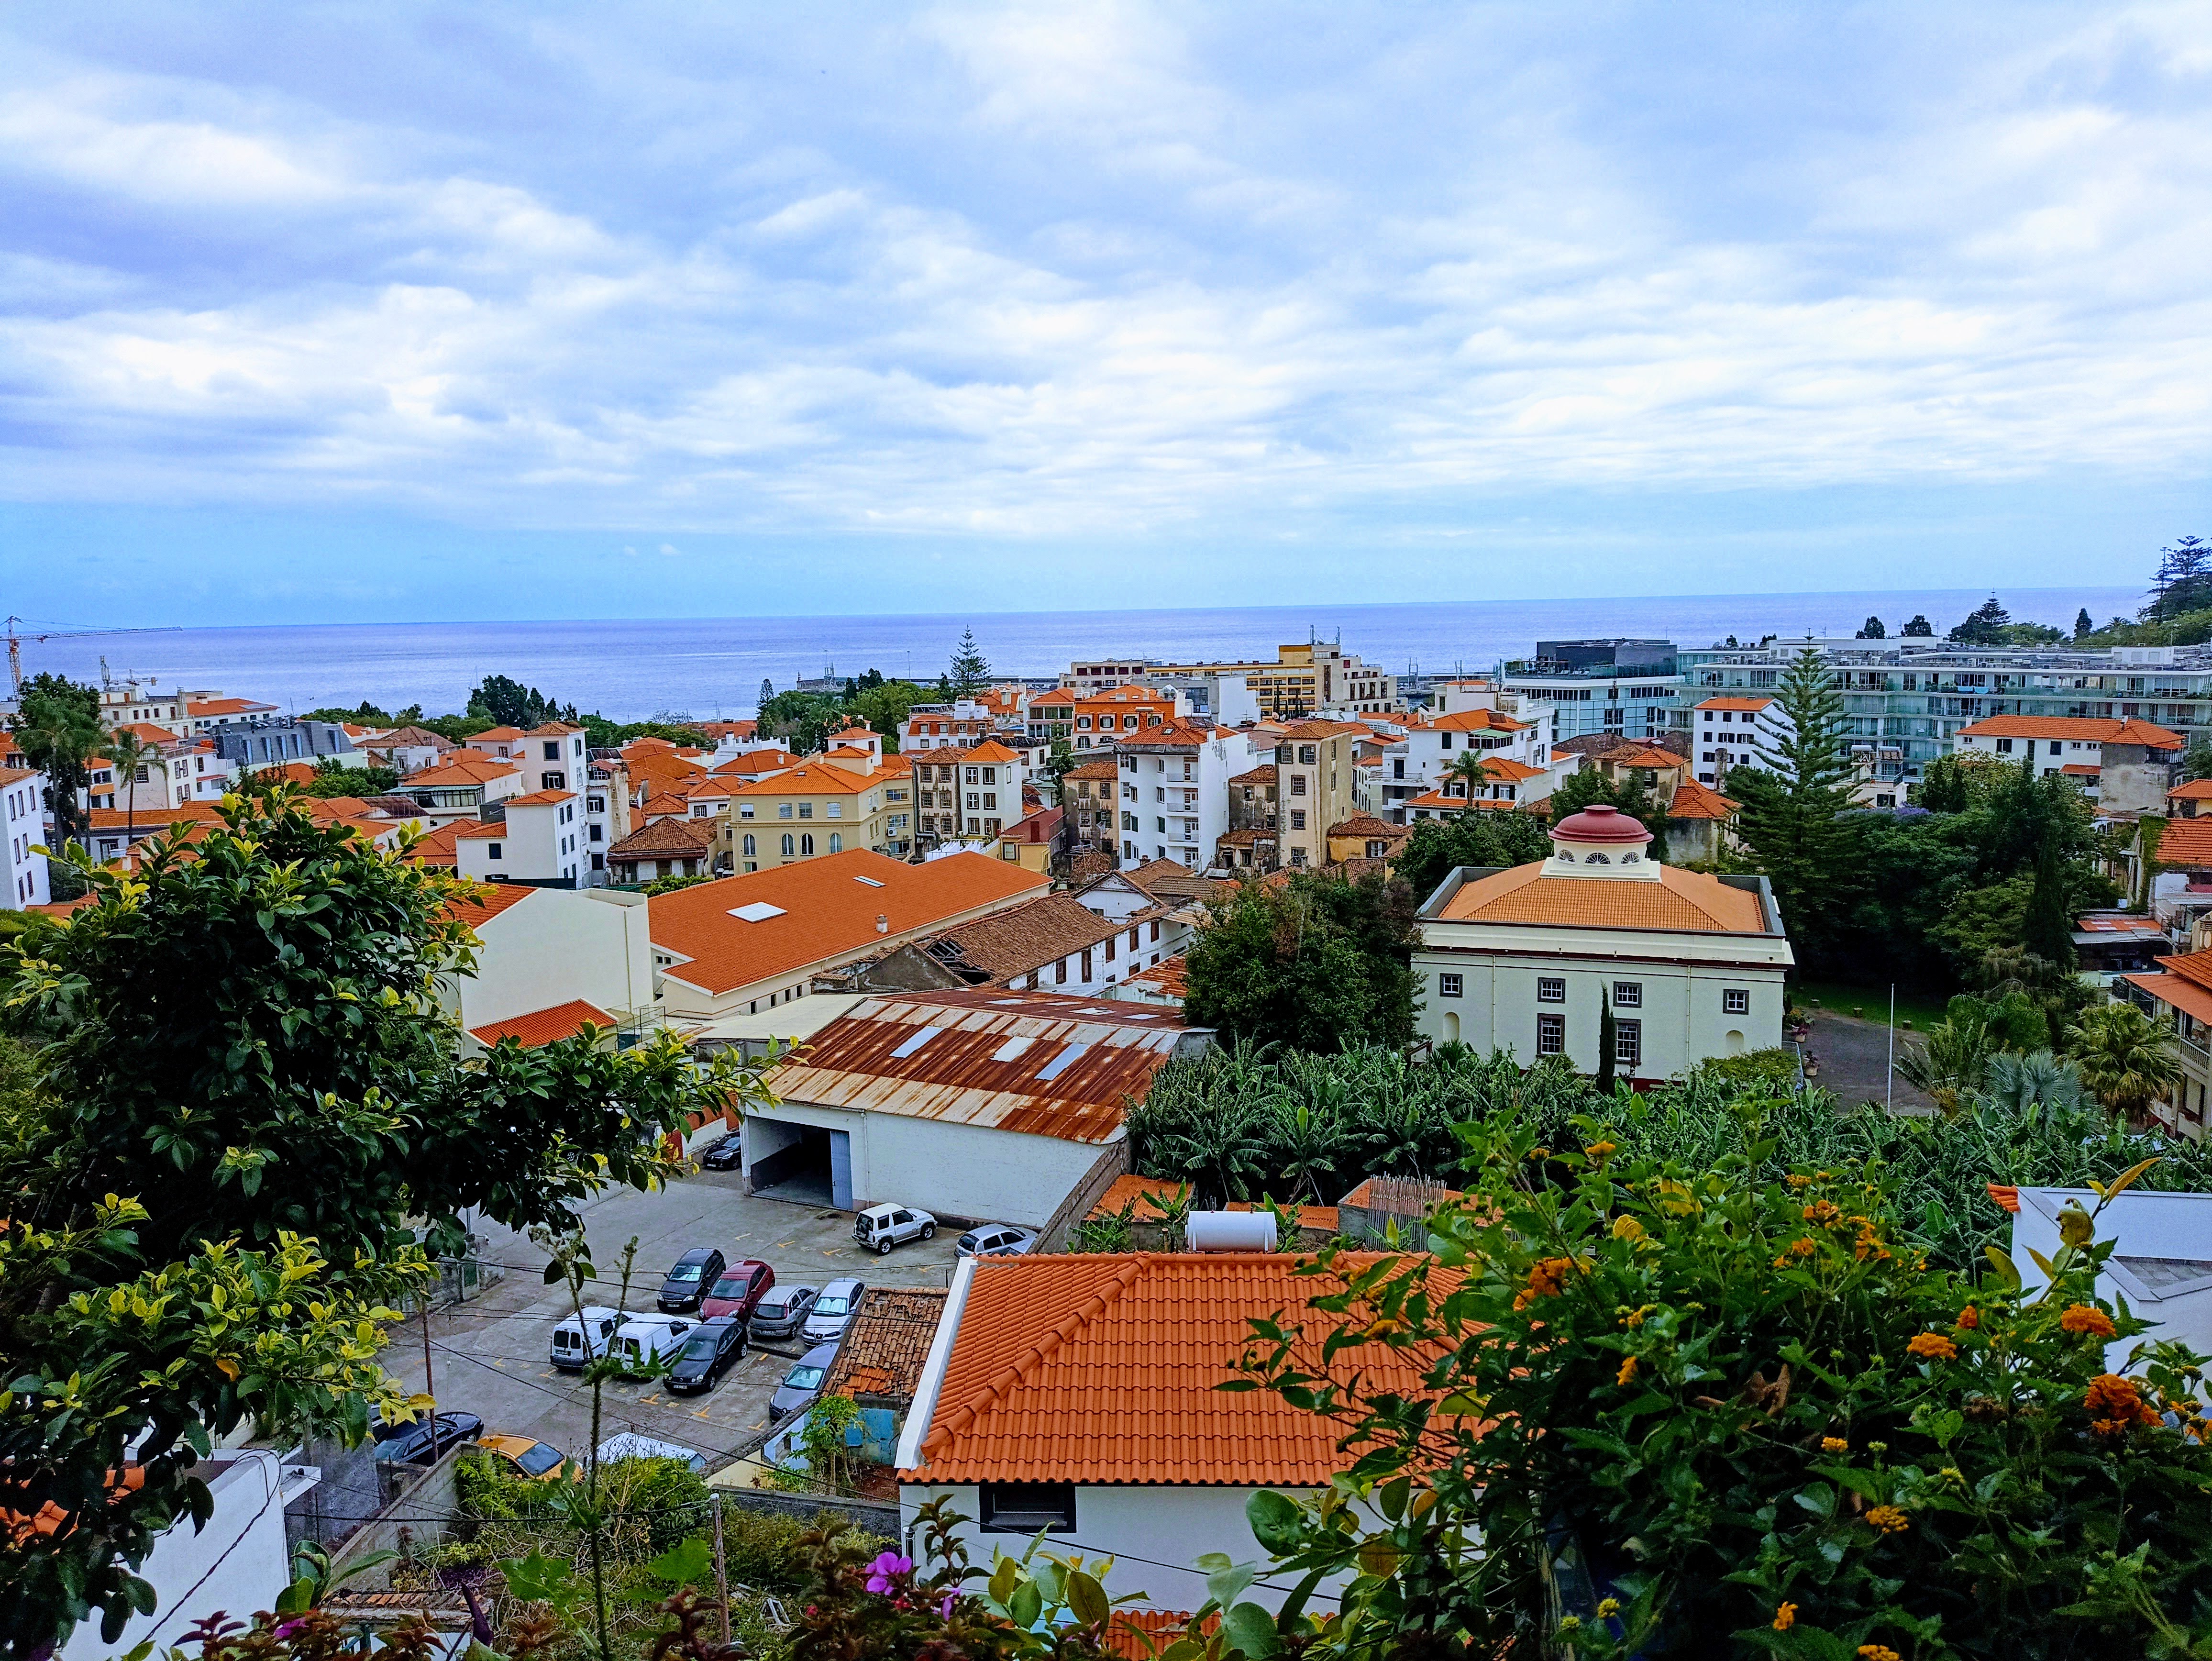 Overview of the city of Funchal